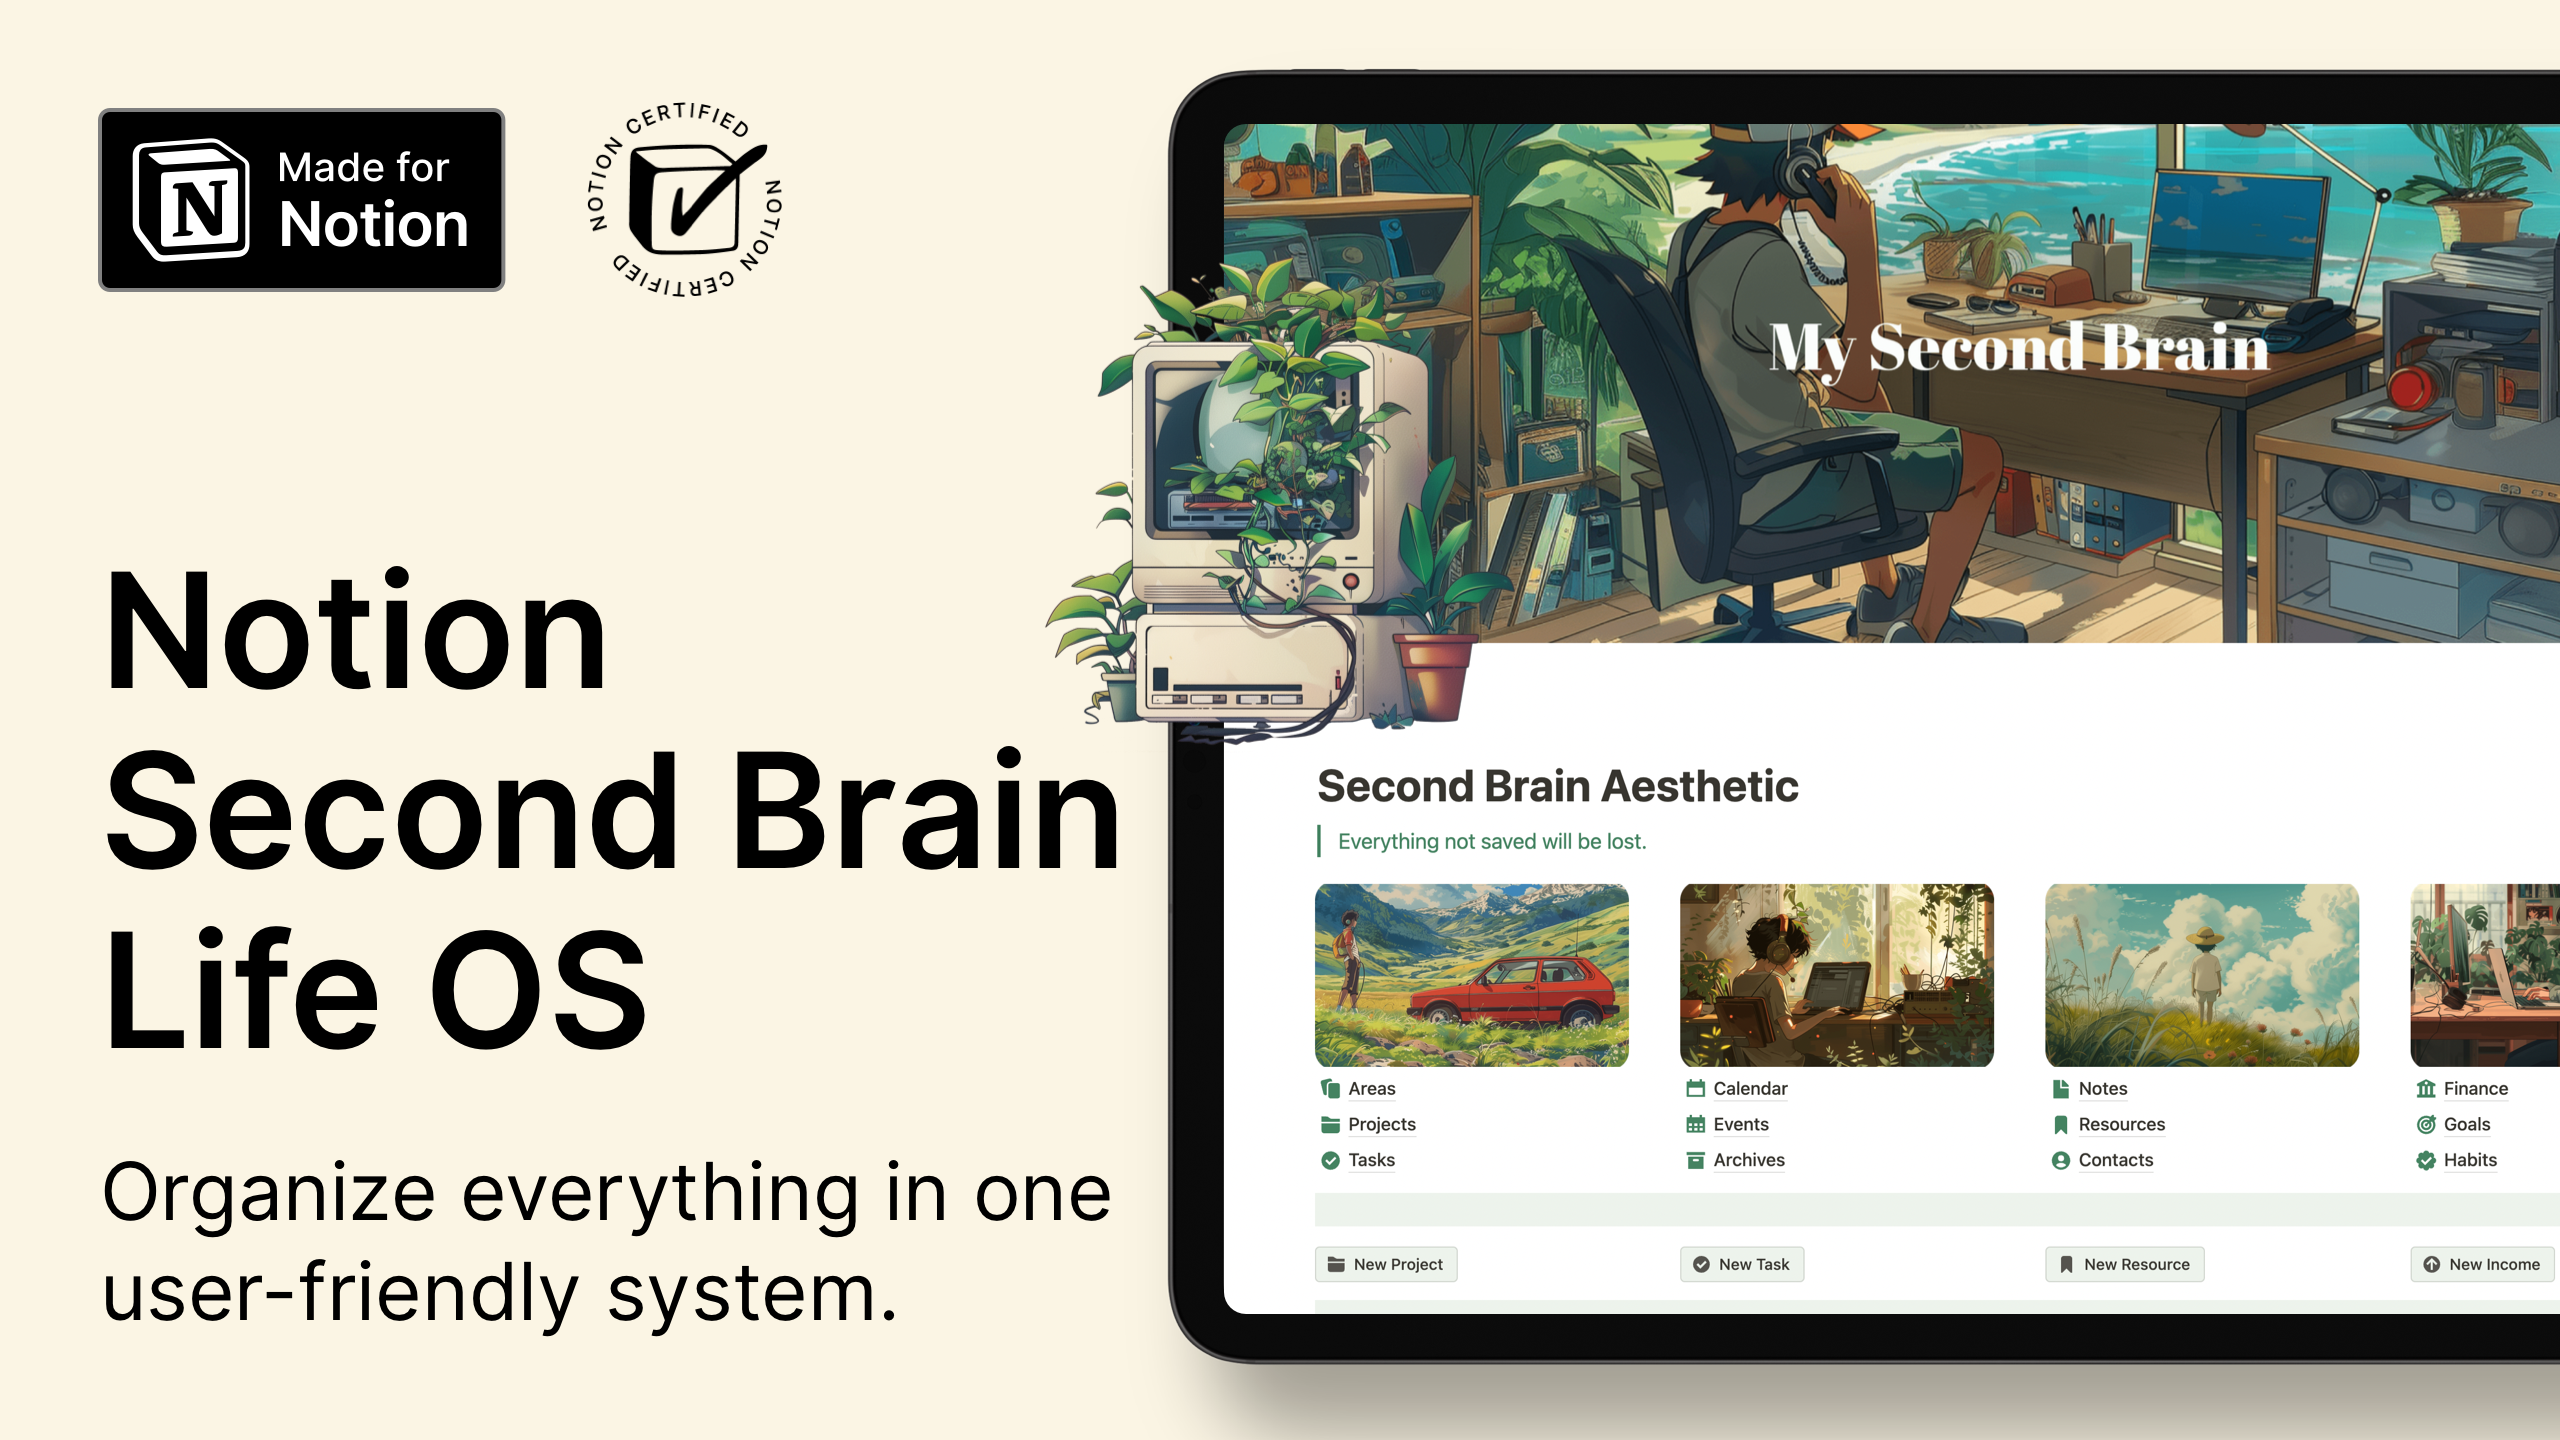 Notion Second Brain Life OS